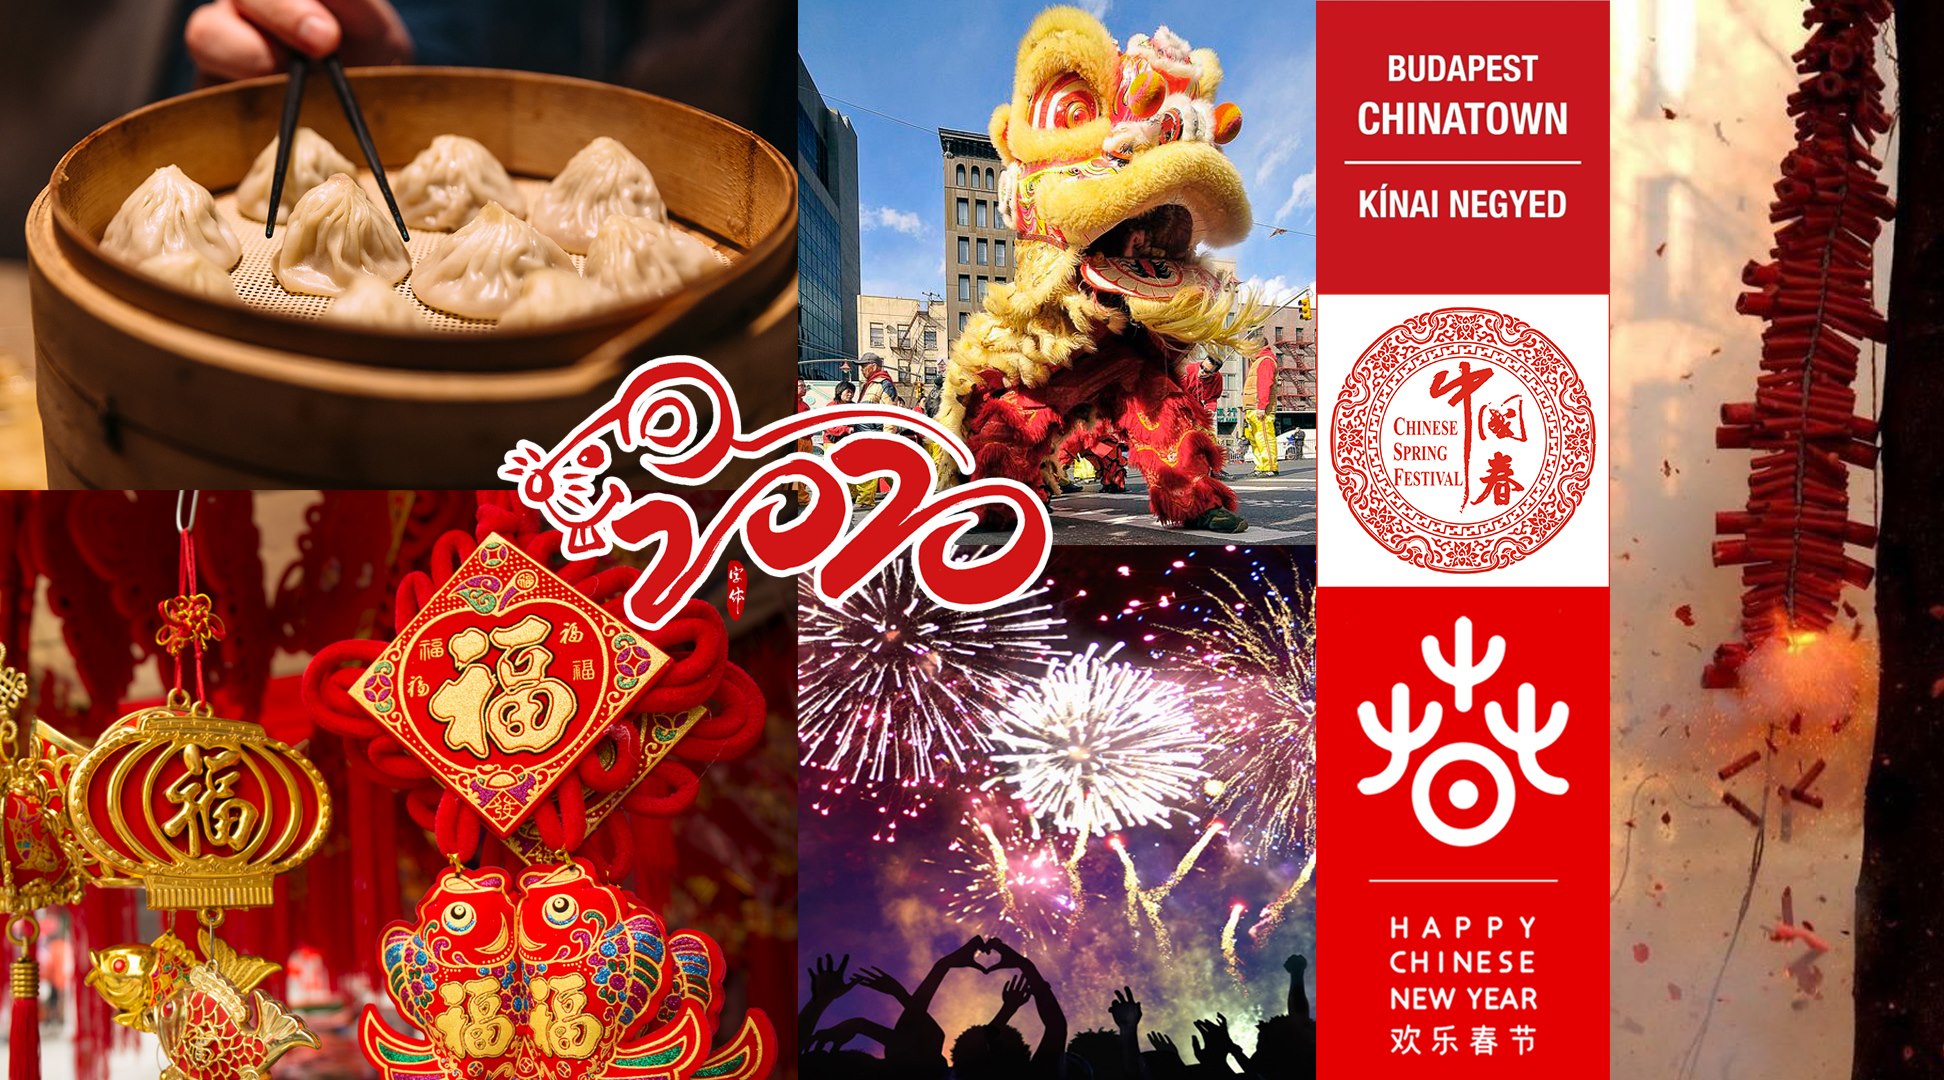 Cancelled: Lunar New Year Festival @ Budapest’s Chinatown, 1 – 2 February